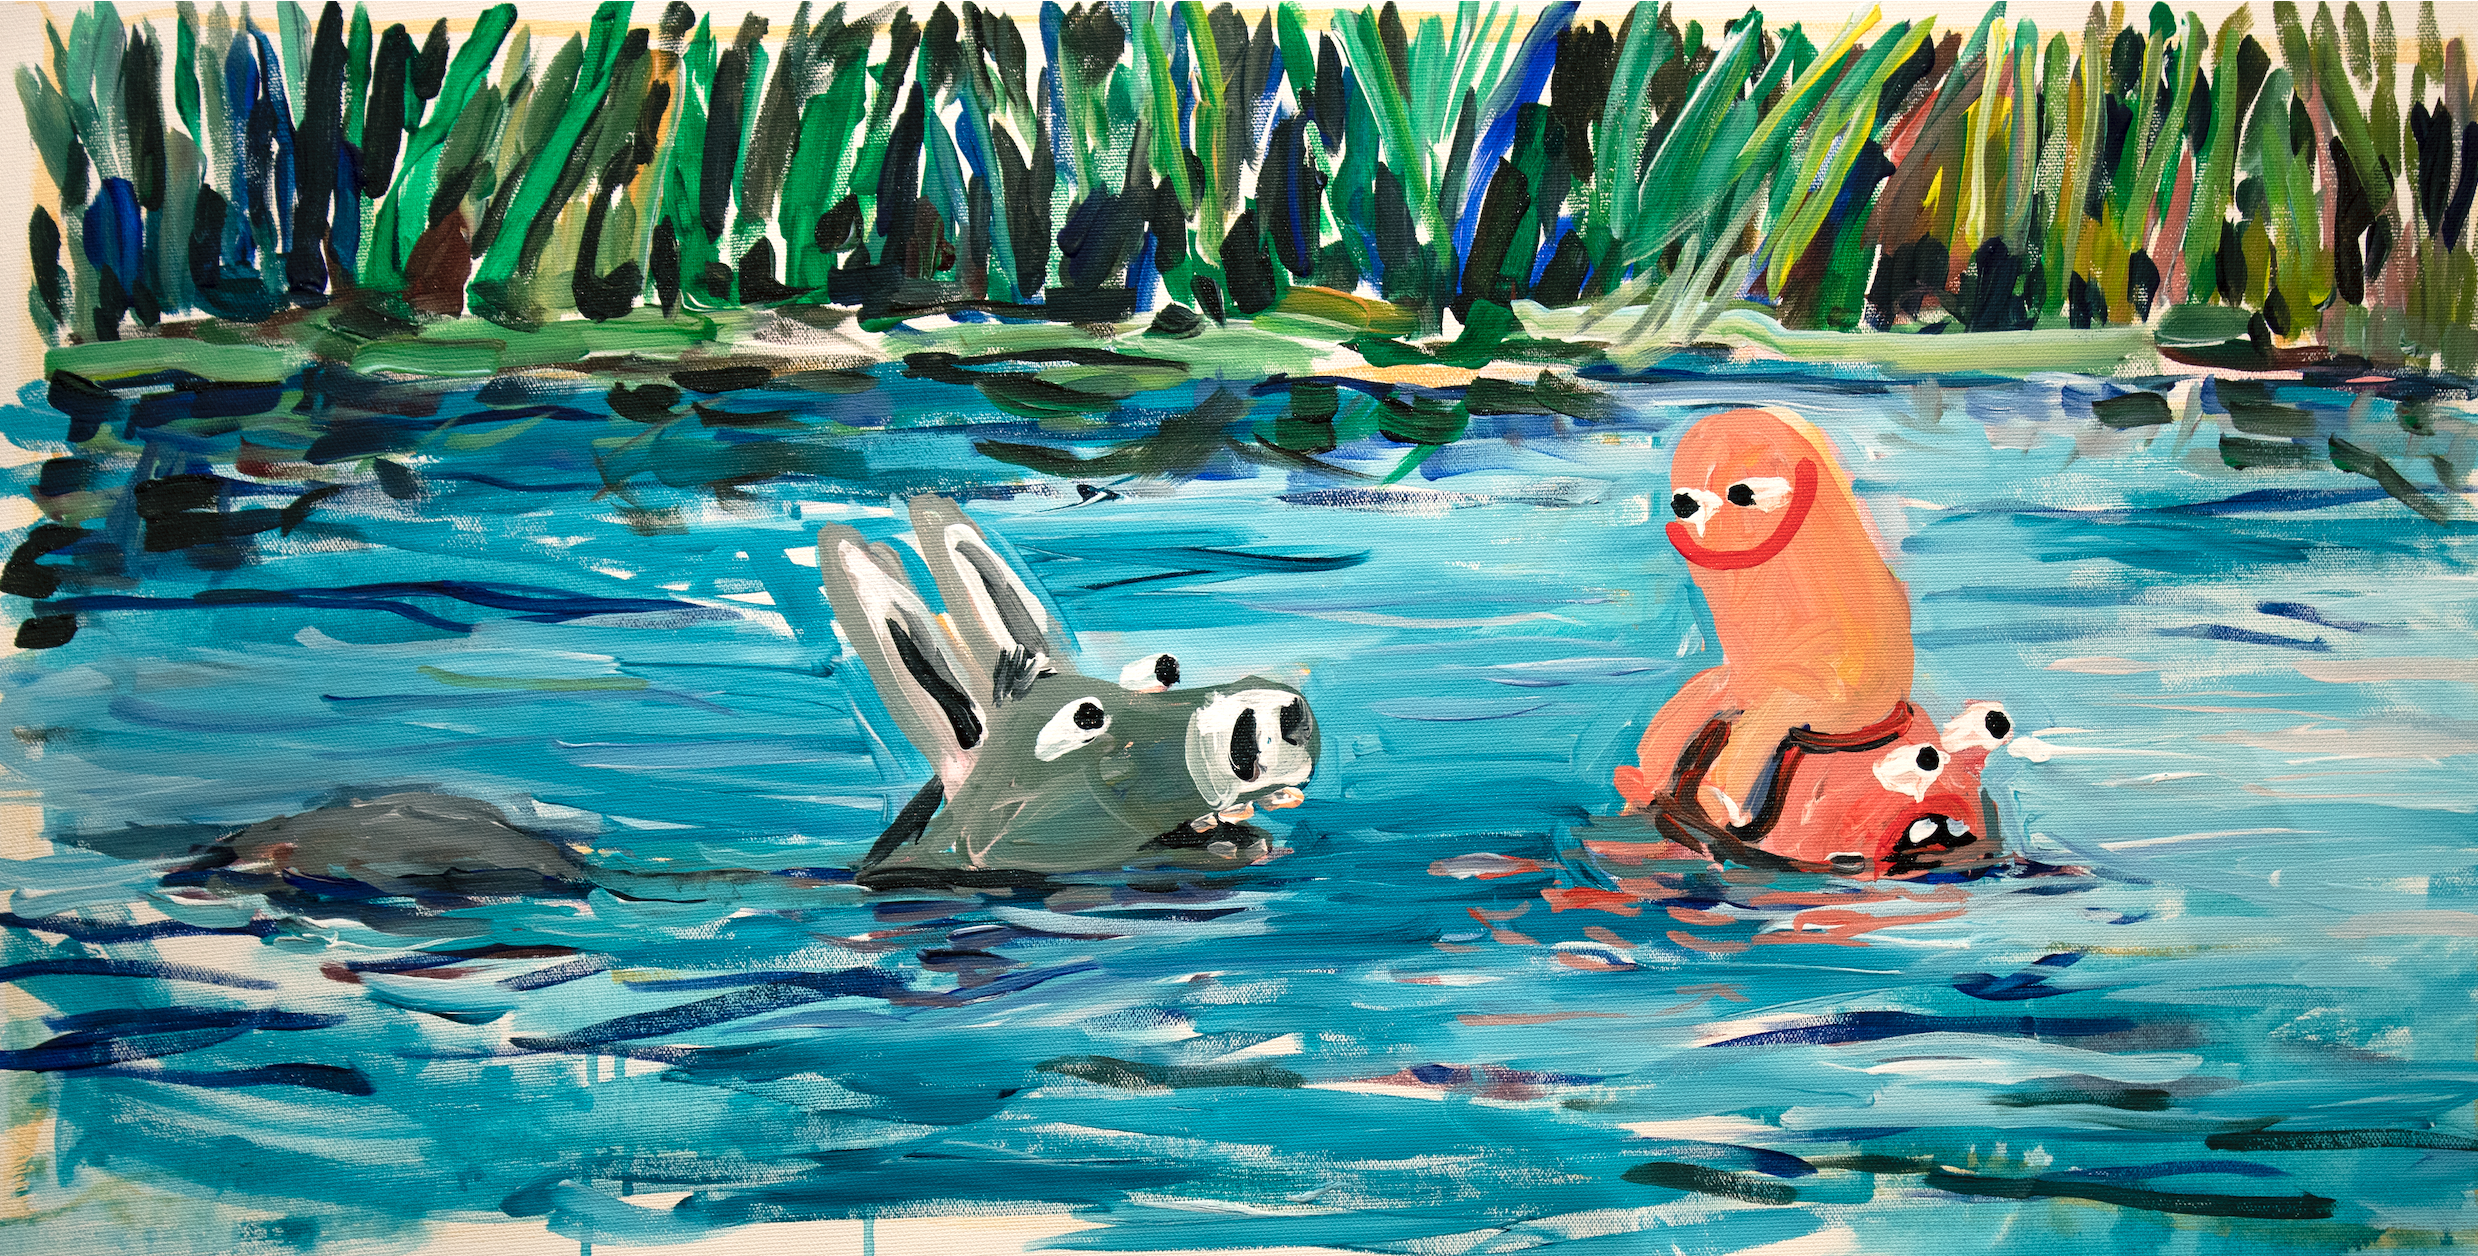 Acrylic on canvas shows a small pink humanoid smiling at a swimming donkey from their perch on a larger humanoid who is half-submerged in water